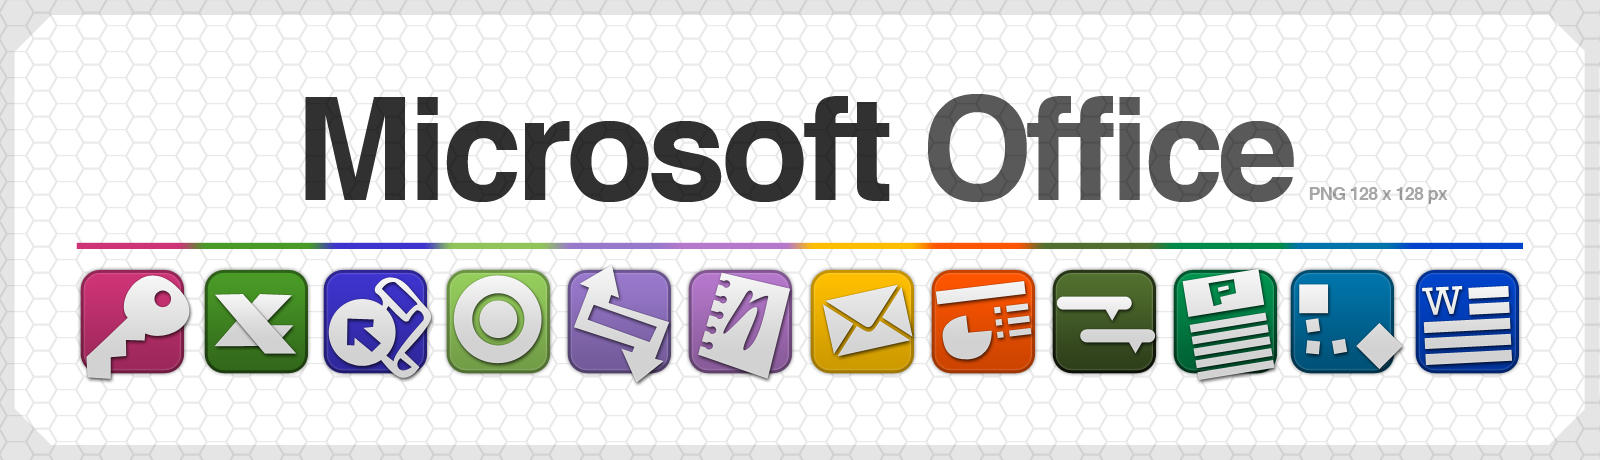 ms office 2010 clipart - photo #36